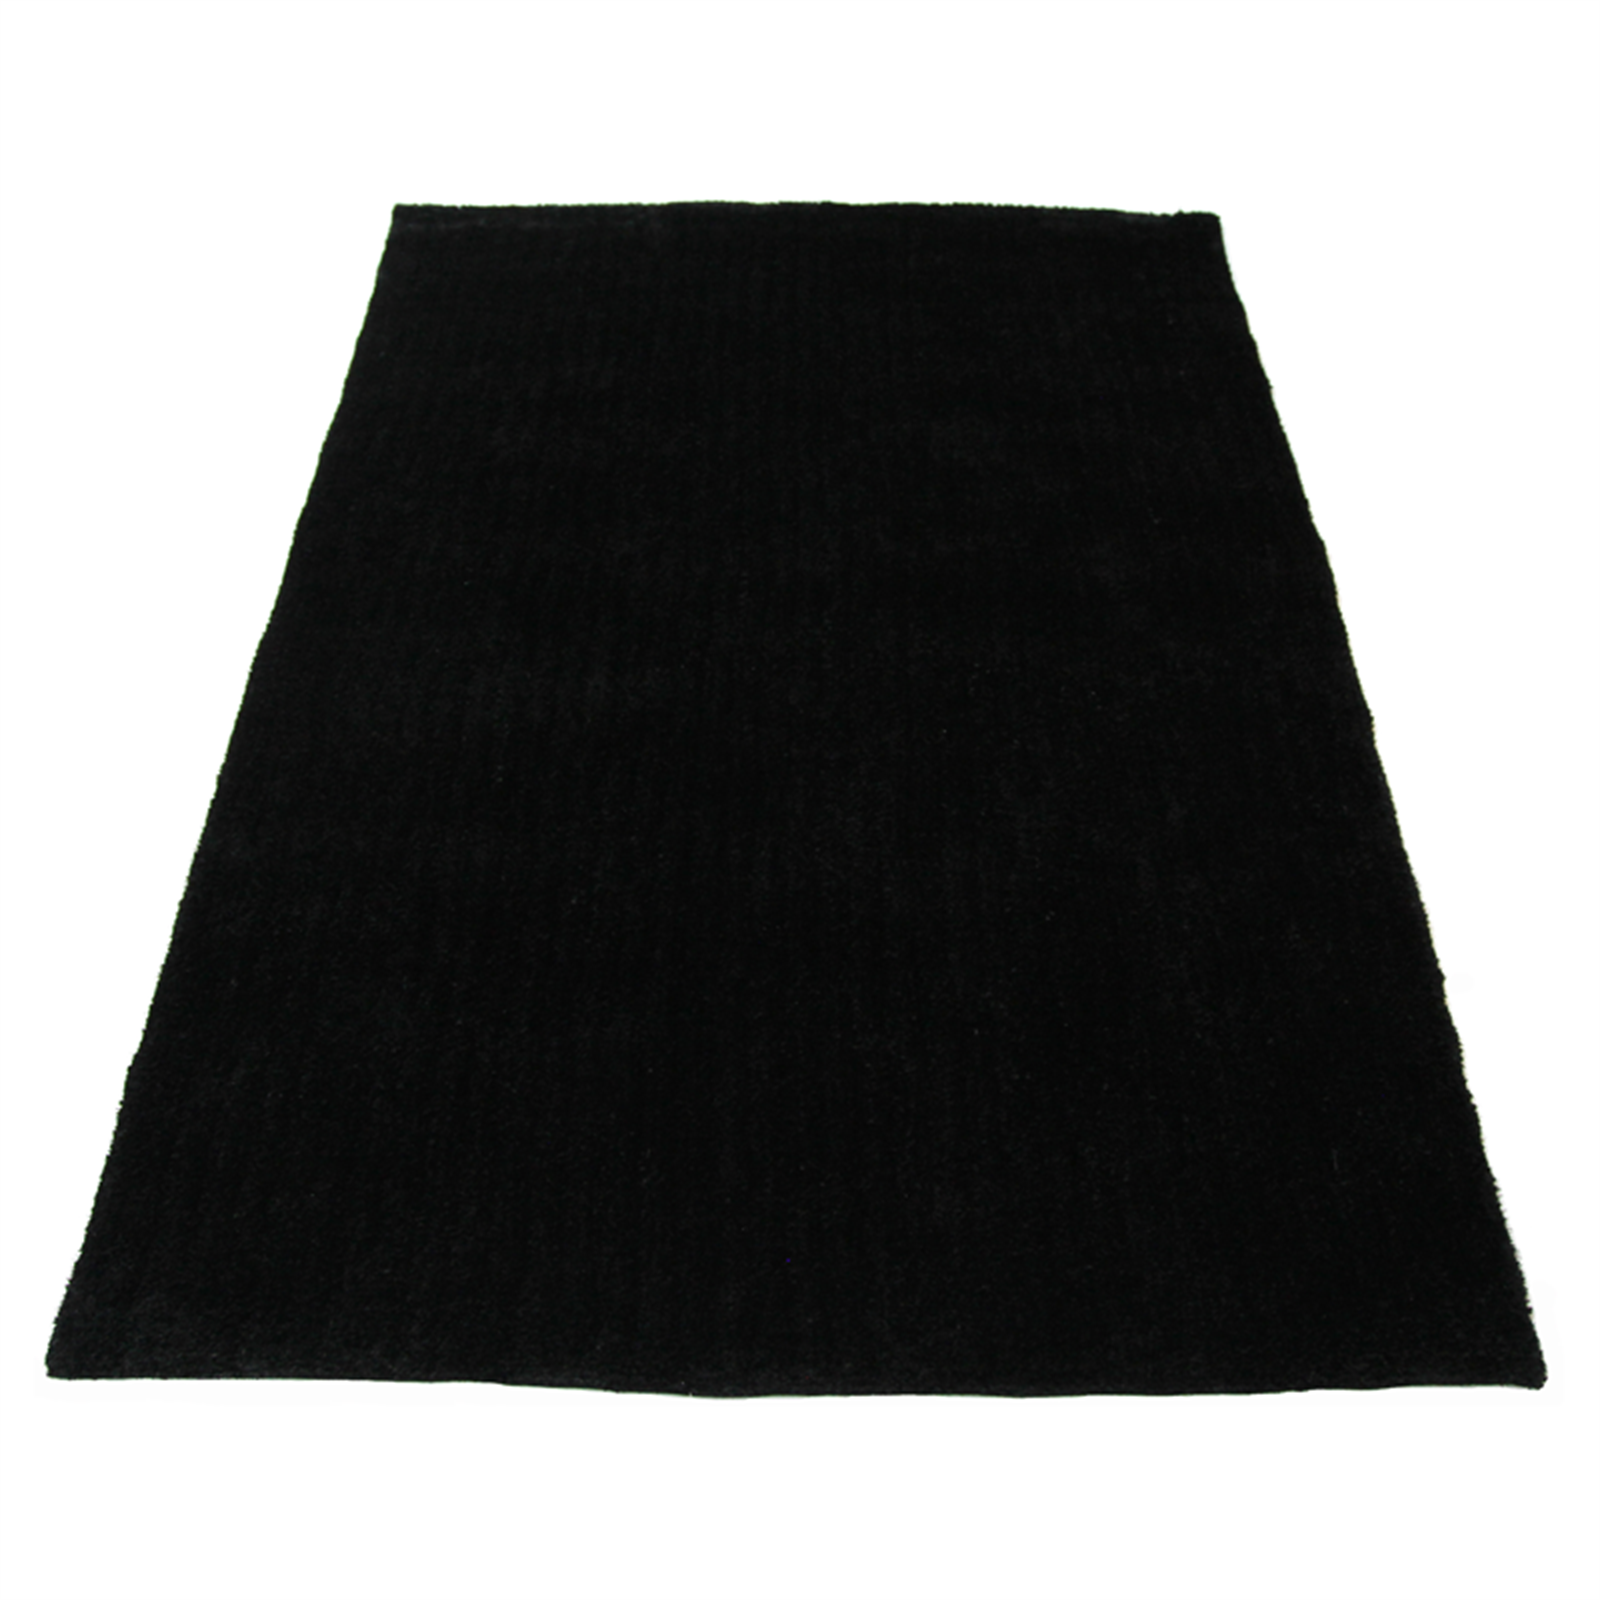 The Estate Collection 200 x 290cm Black Berlin Rug